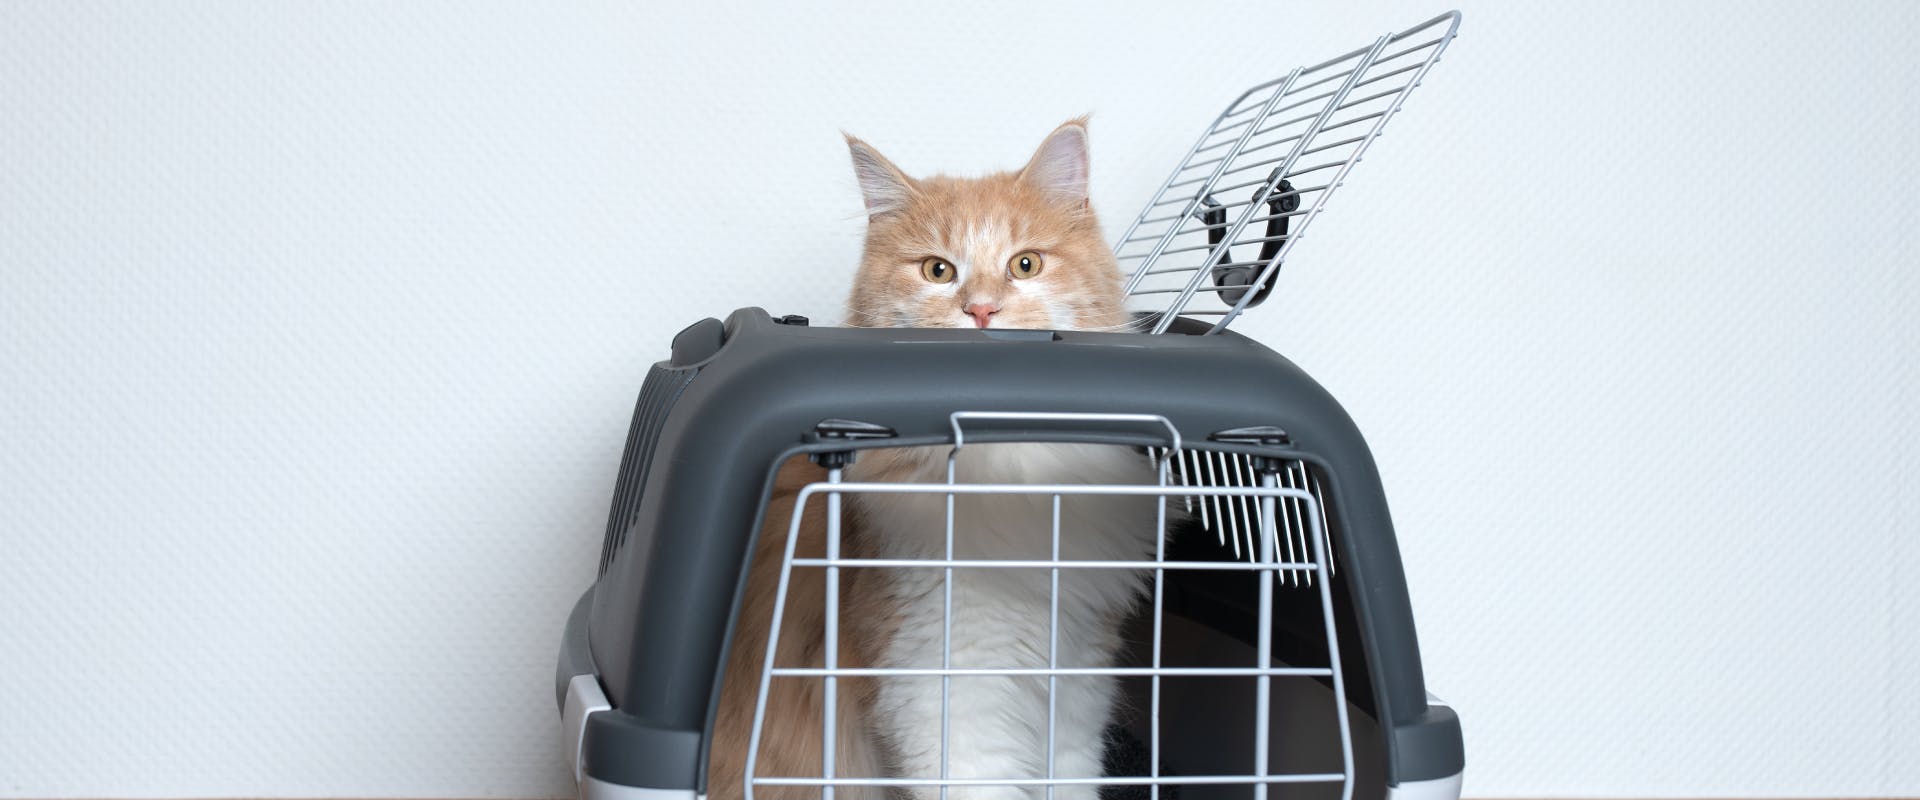 a long haired ginger and white cat peaking out of a cat carrier